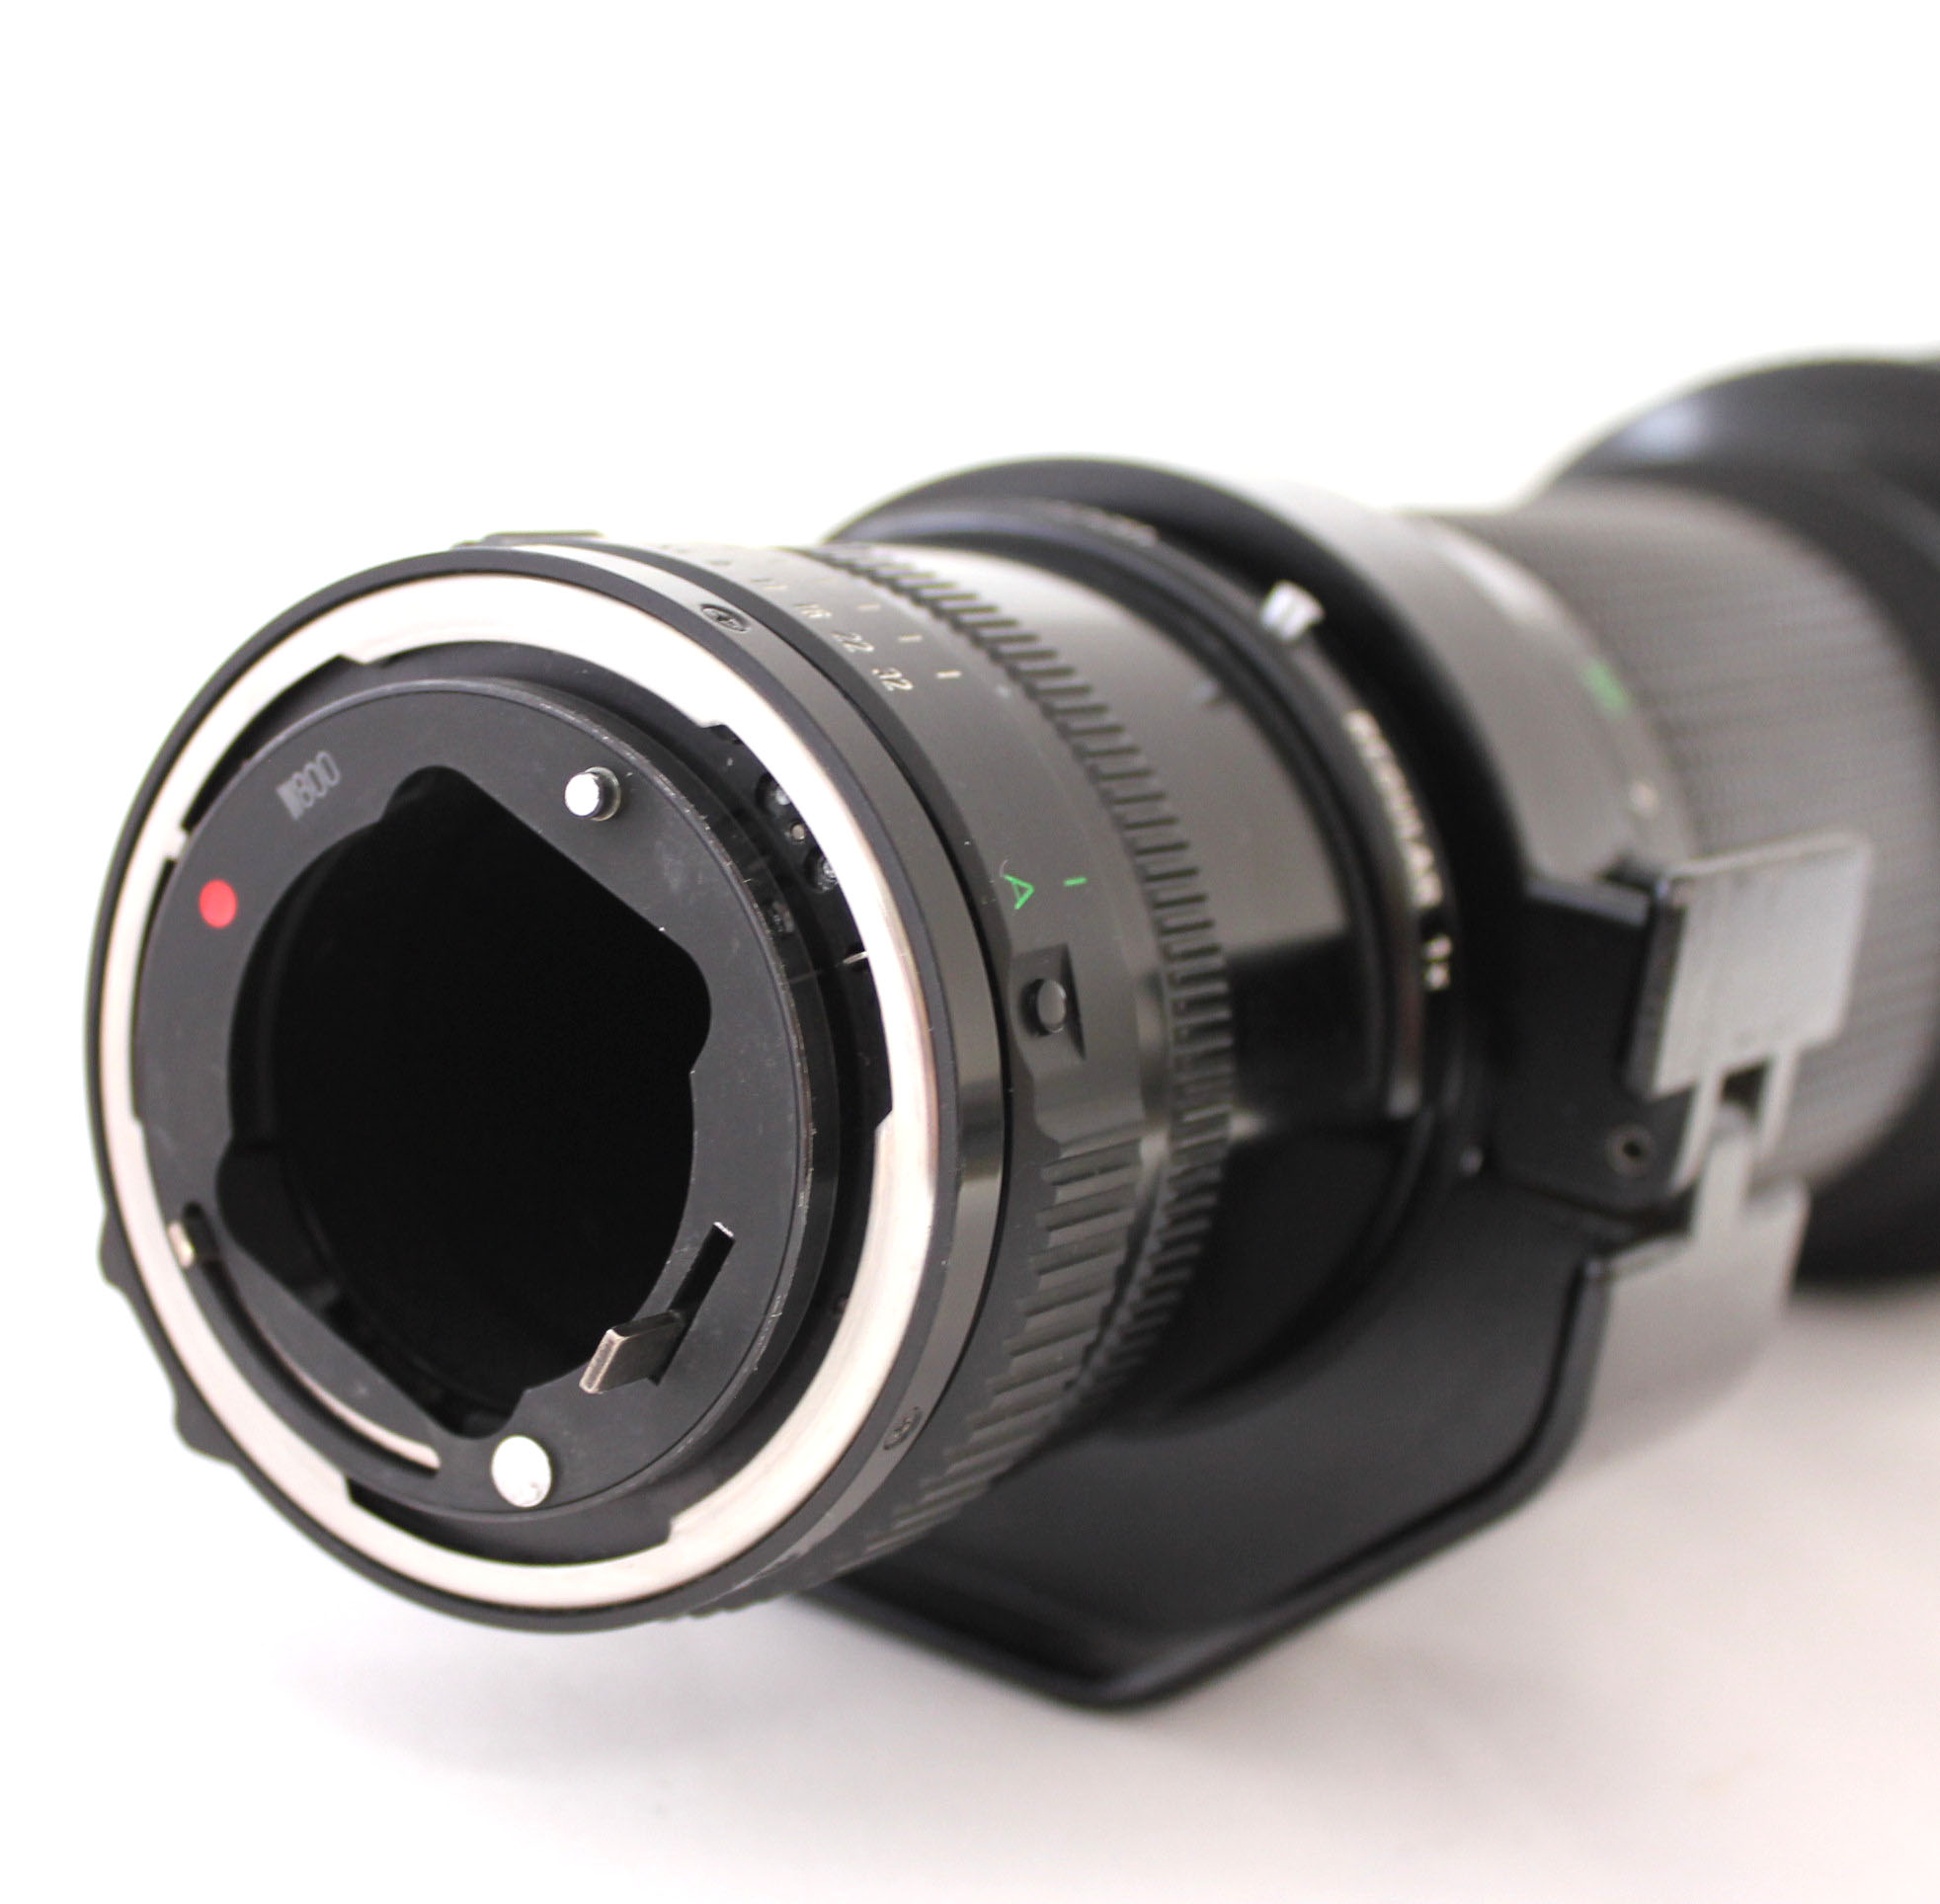  Canon New FD NFD 400mm F/4.5 MF Telephoto Lens from Japan Photo 1